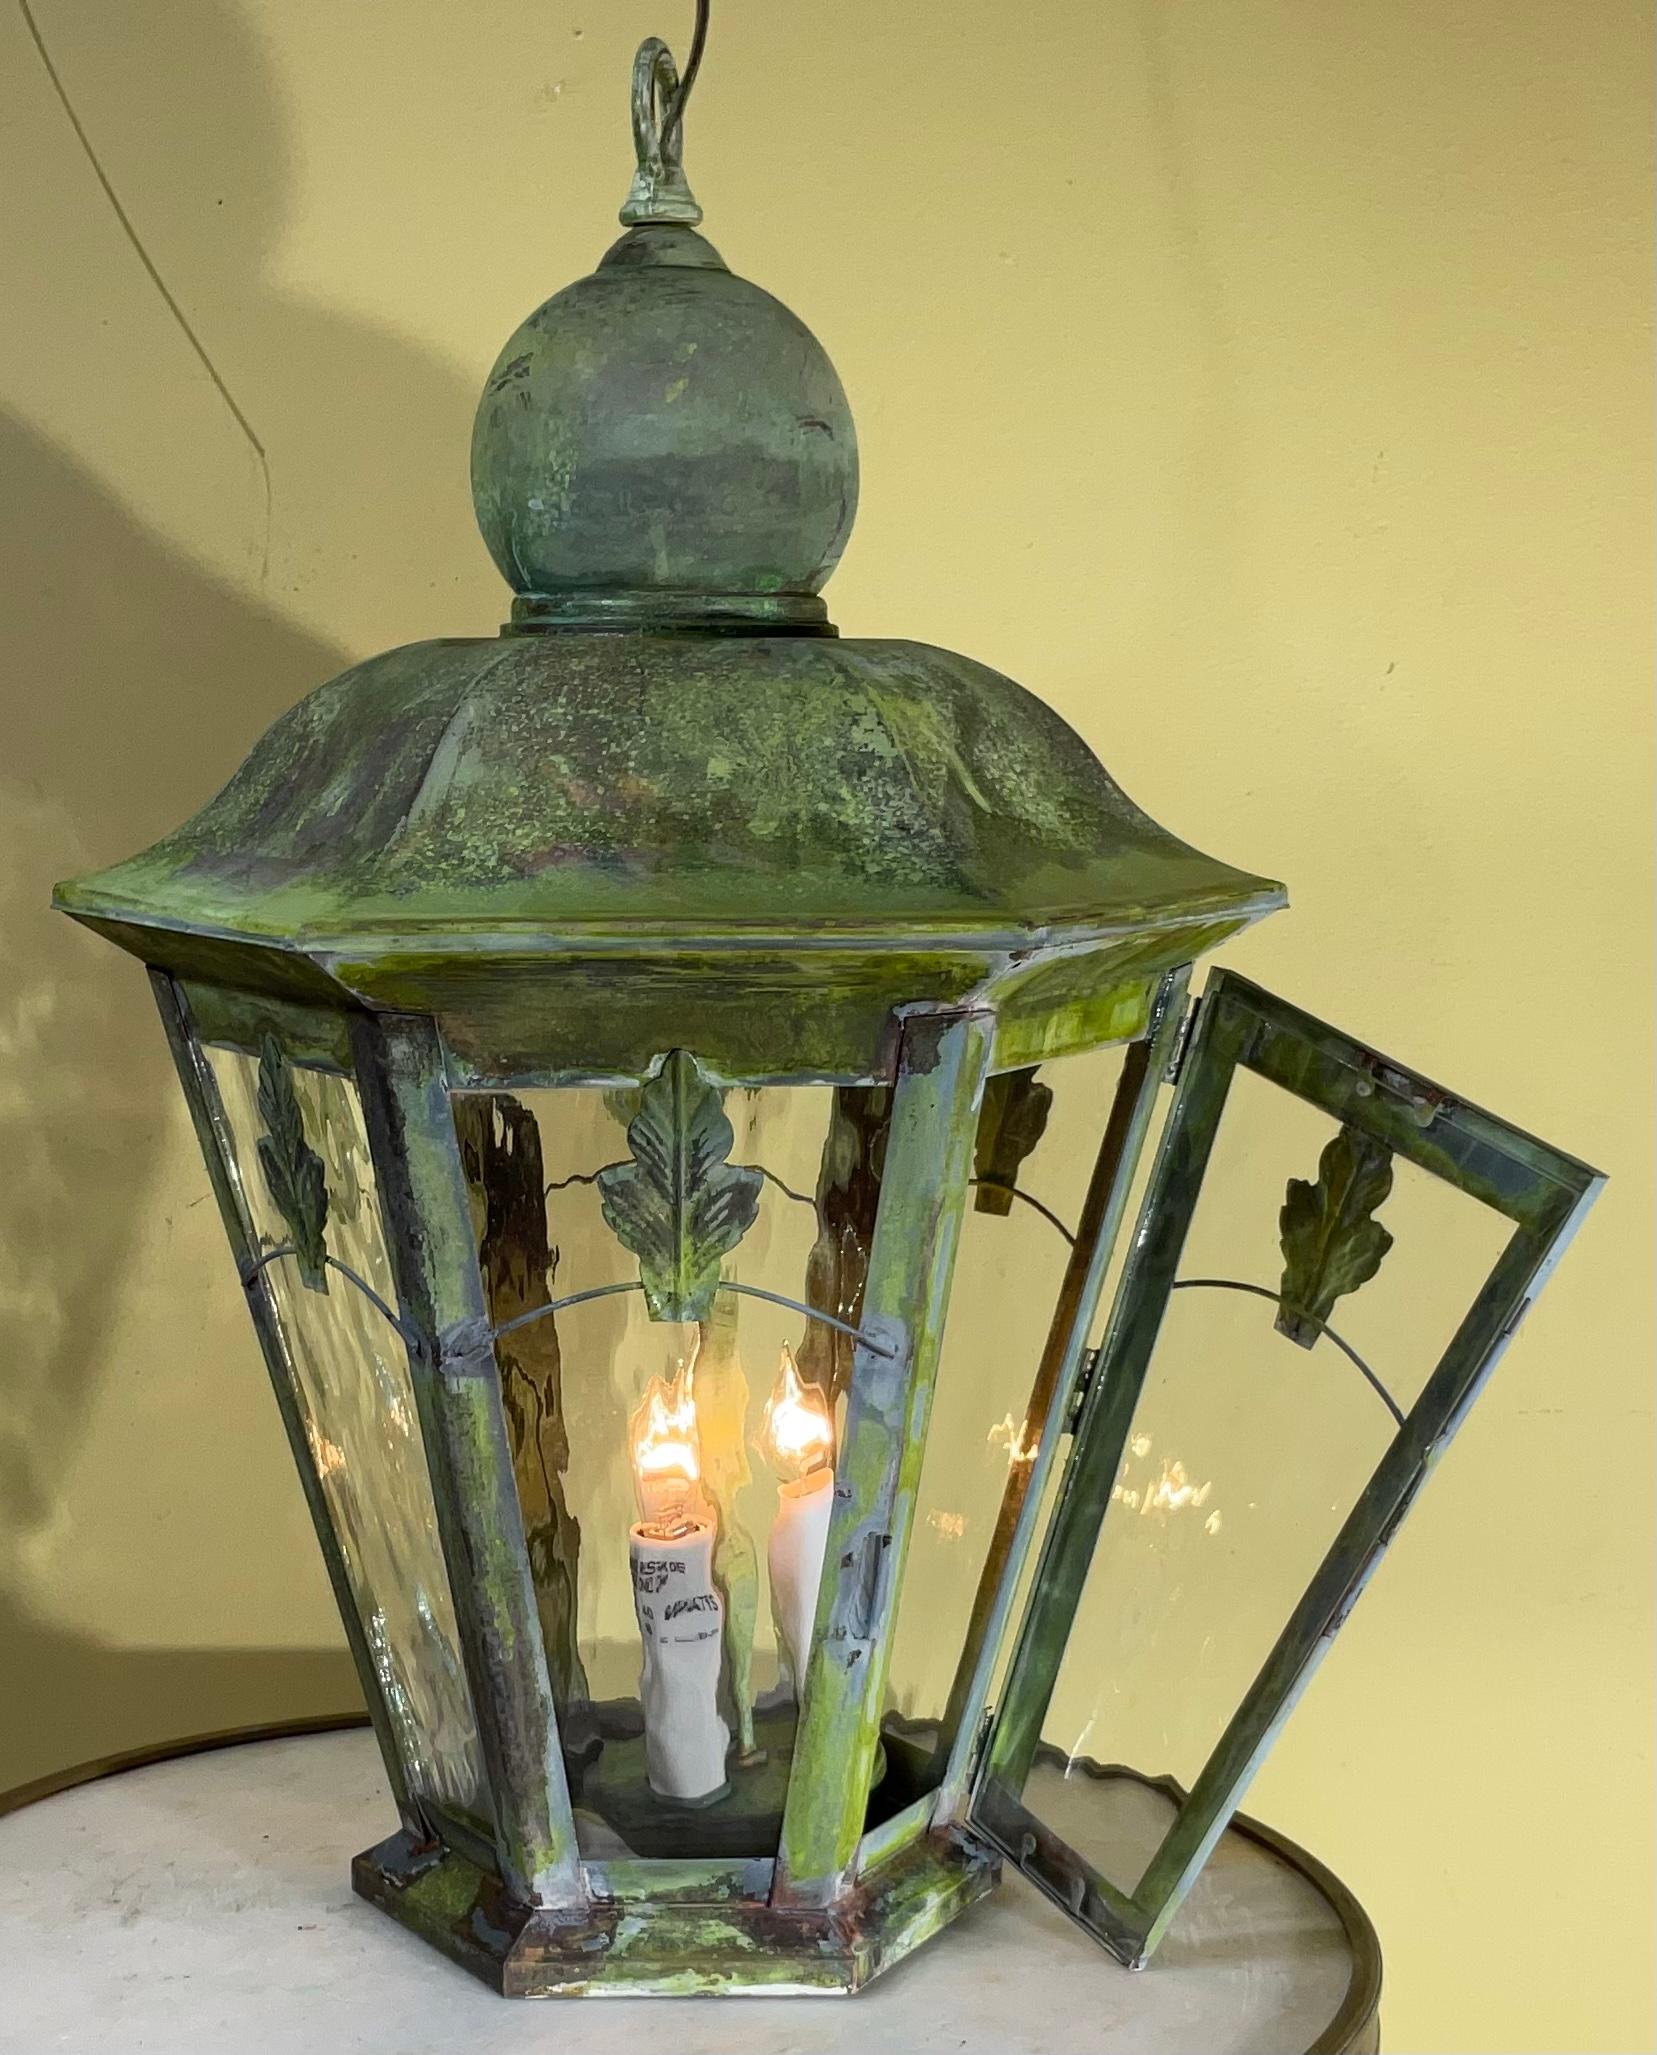 Artistically made handcrafted solid brass lantern with three 40/watt light each , with beautiful patina. Originally was converted from wall lantern to hanging lantern, newly rewired. Canopy included.
Great decorative light for outdoor or indoor.